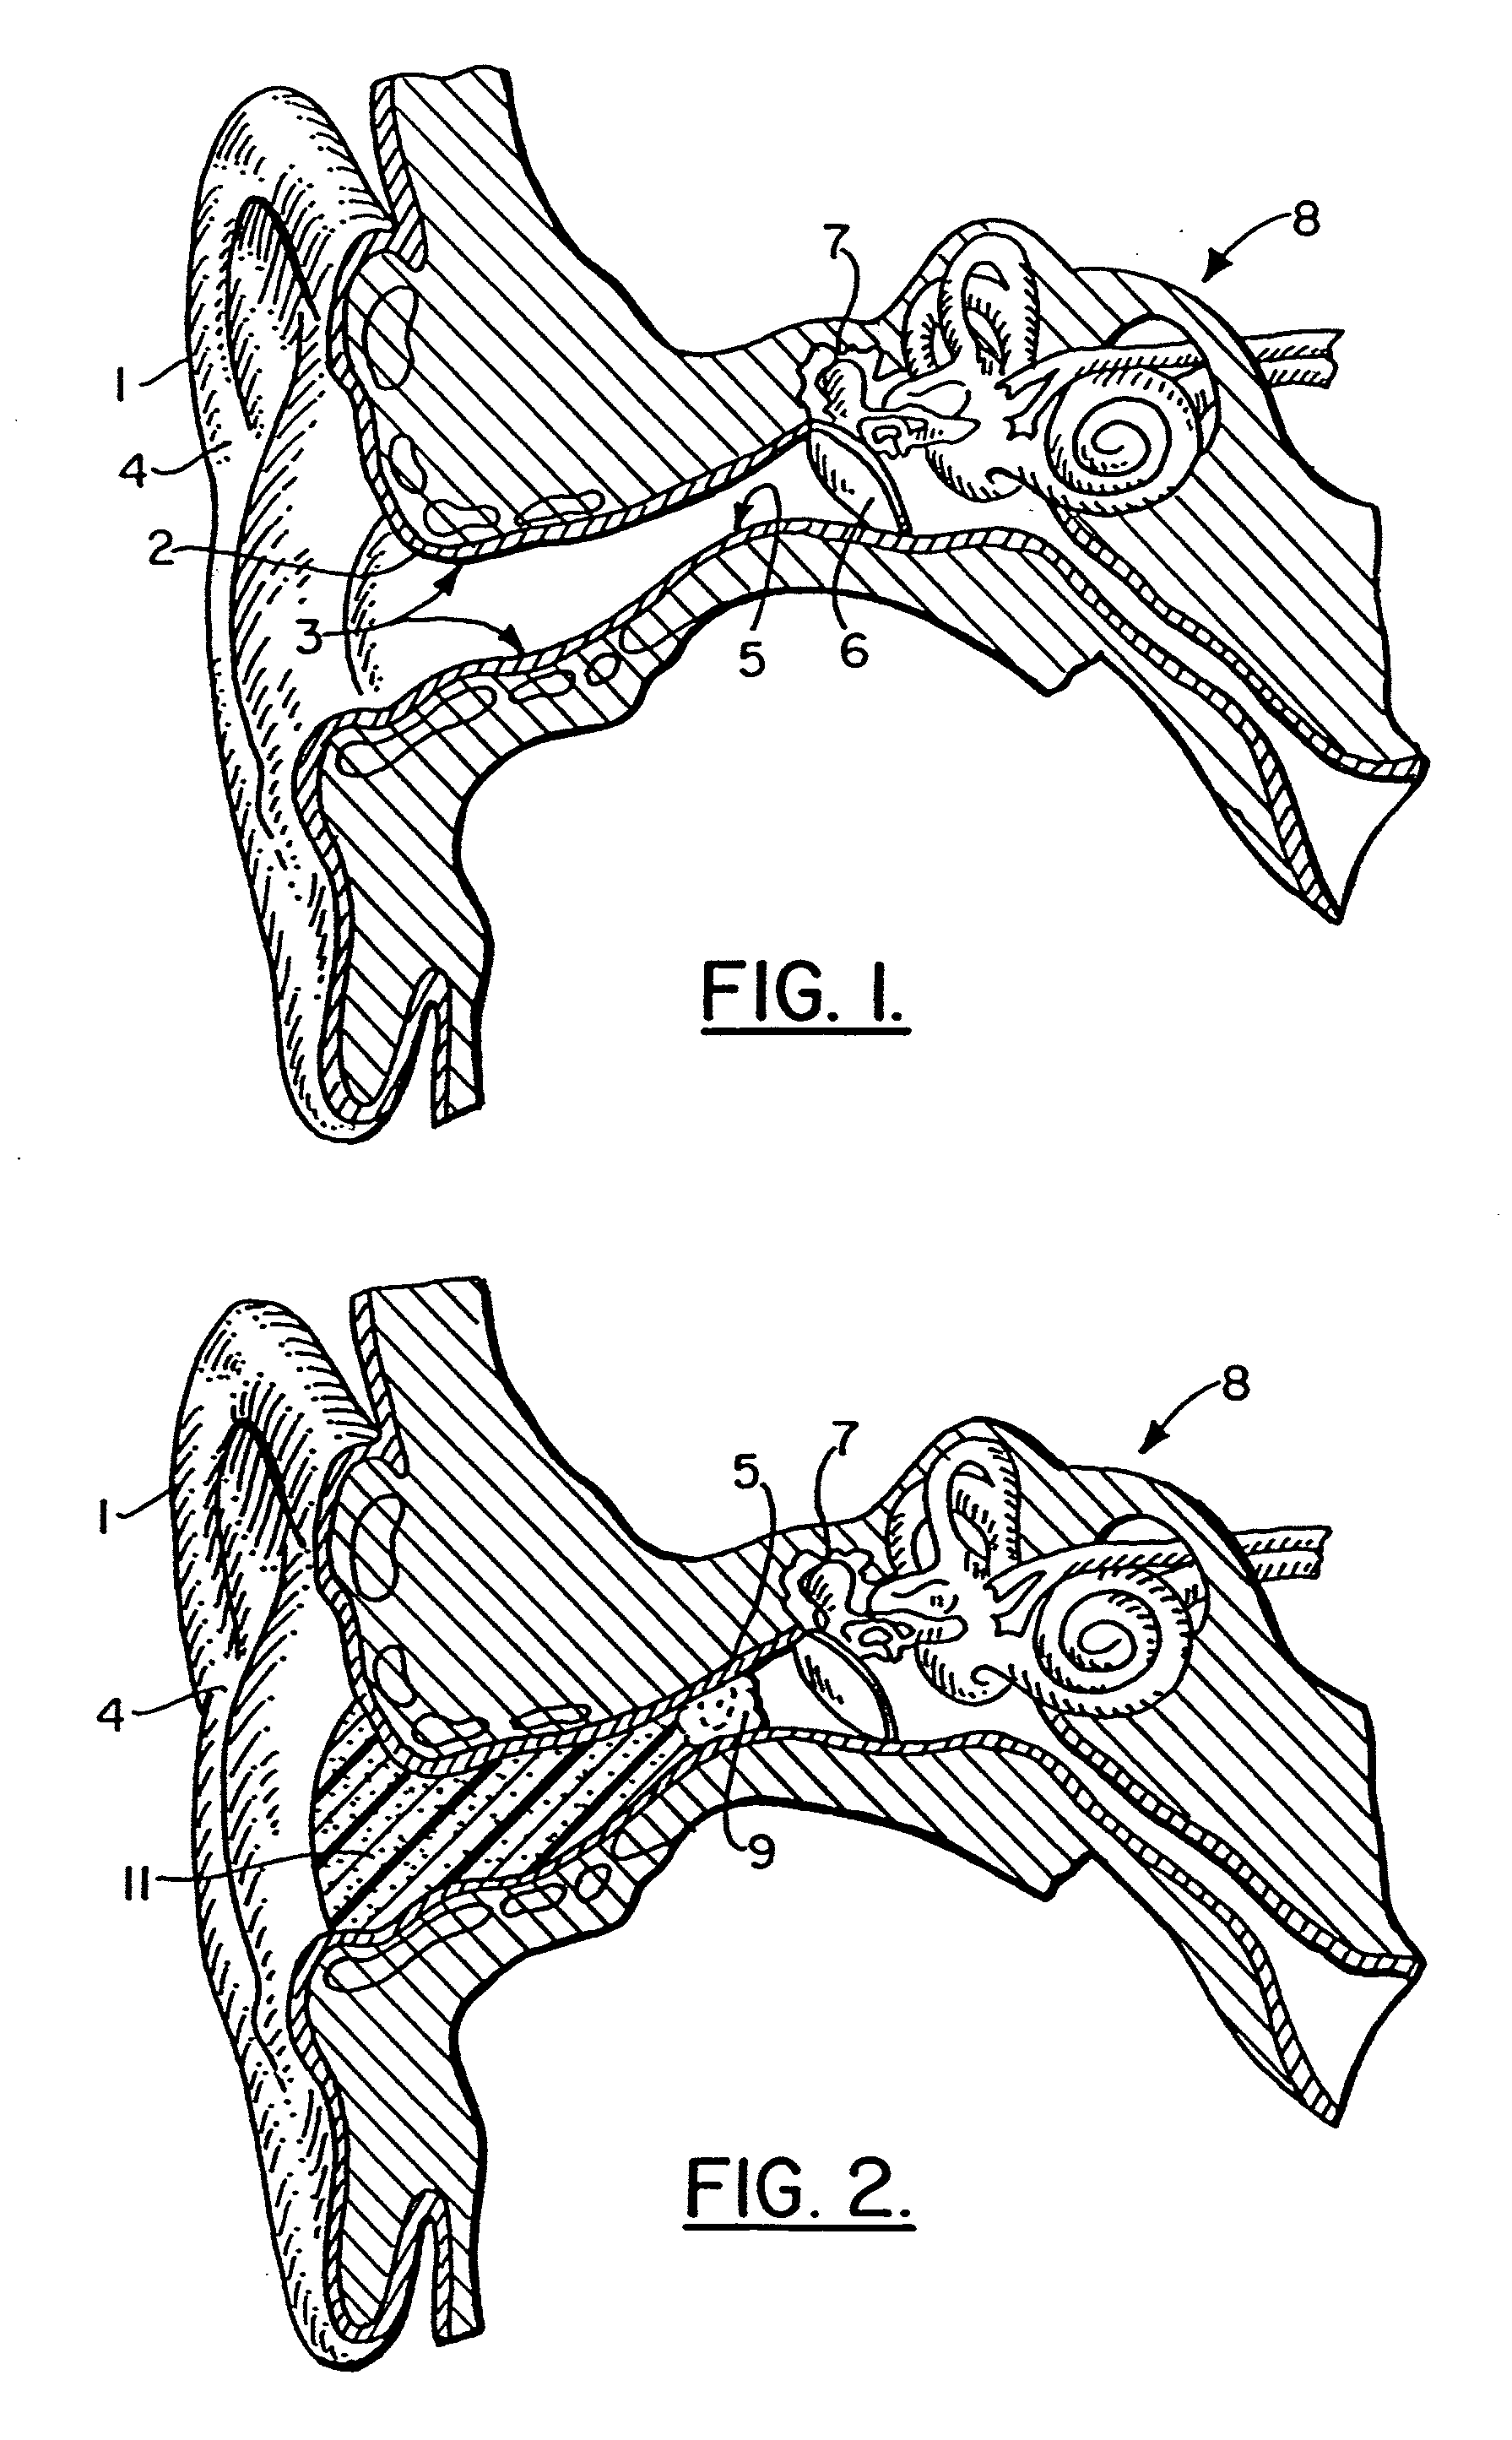 Method of manufacturing a soft hearing aid